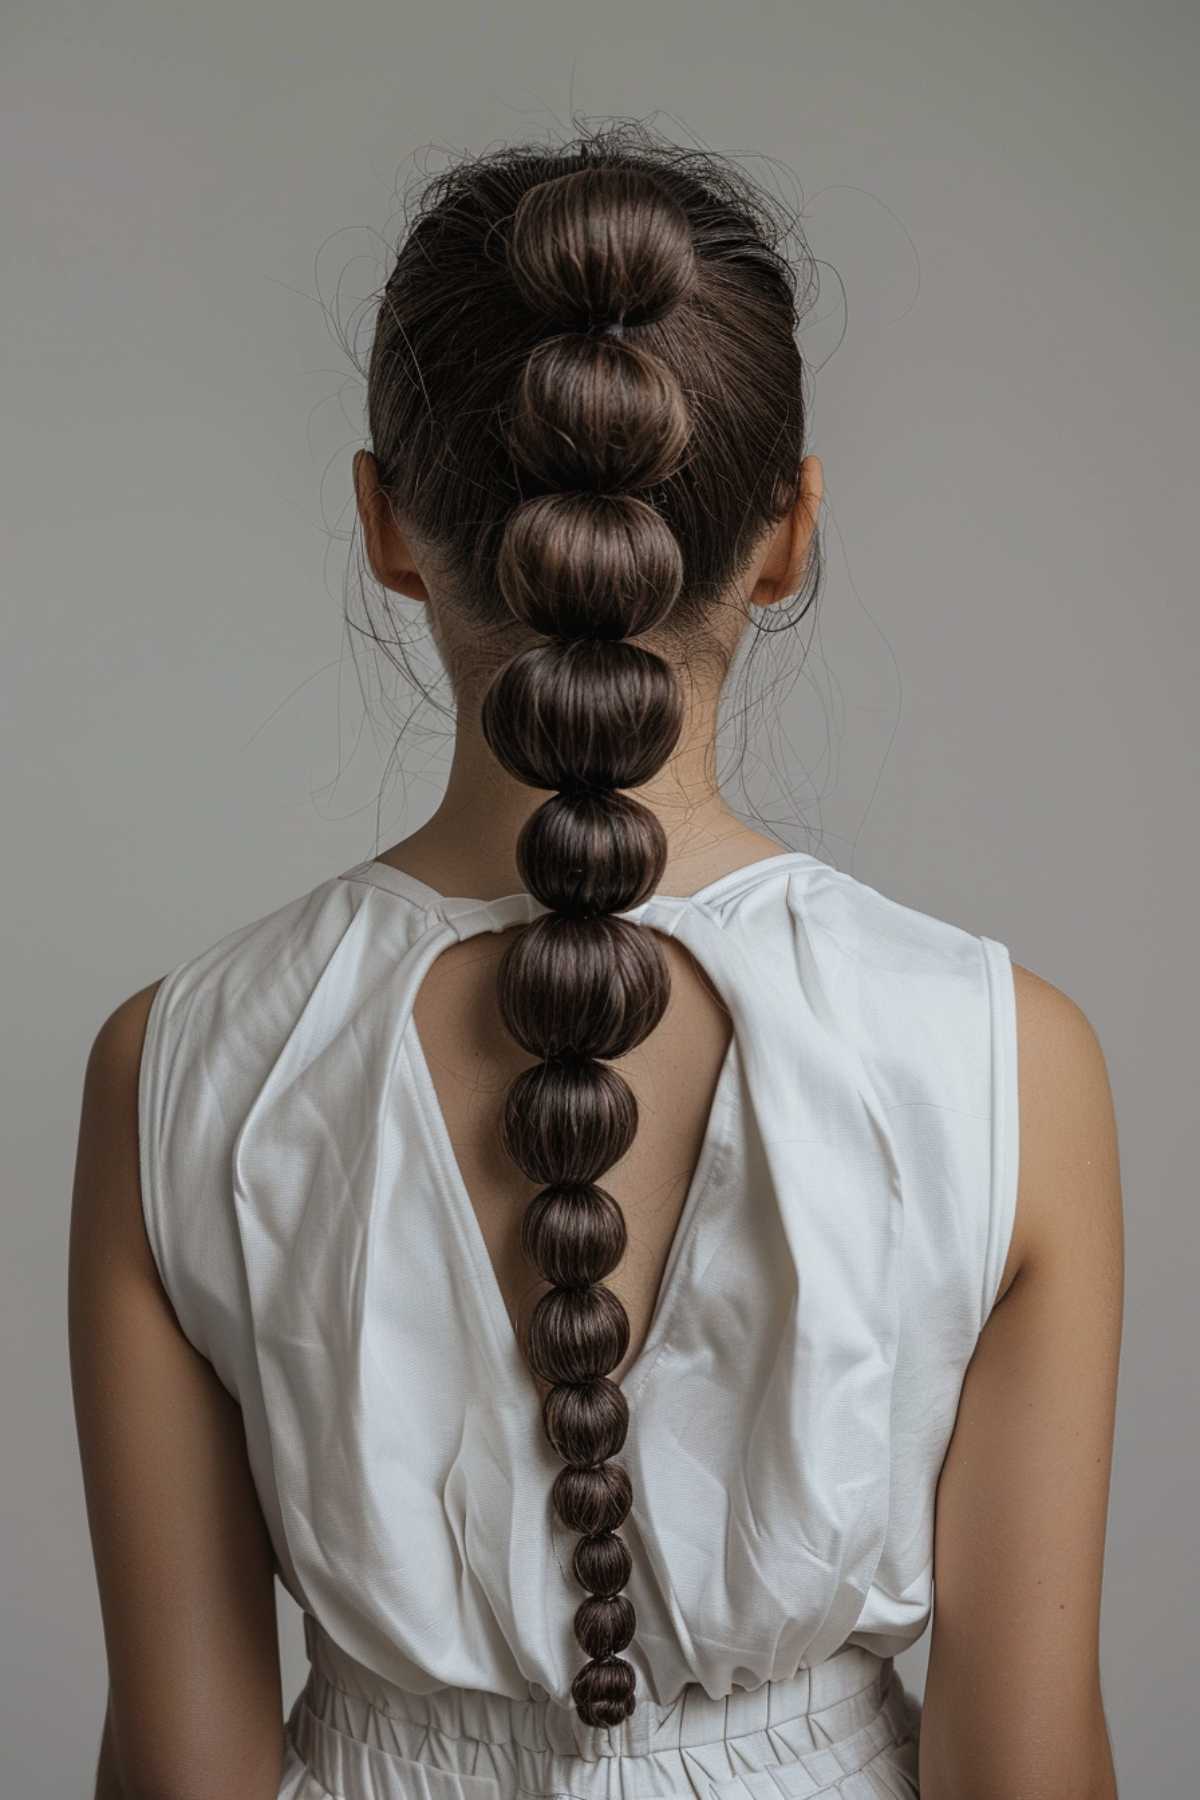 Functional and fashionable sporty bubble braids suitable for active days and adding a fun twist to long hair.